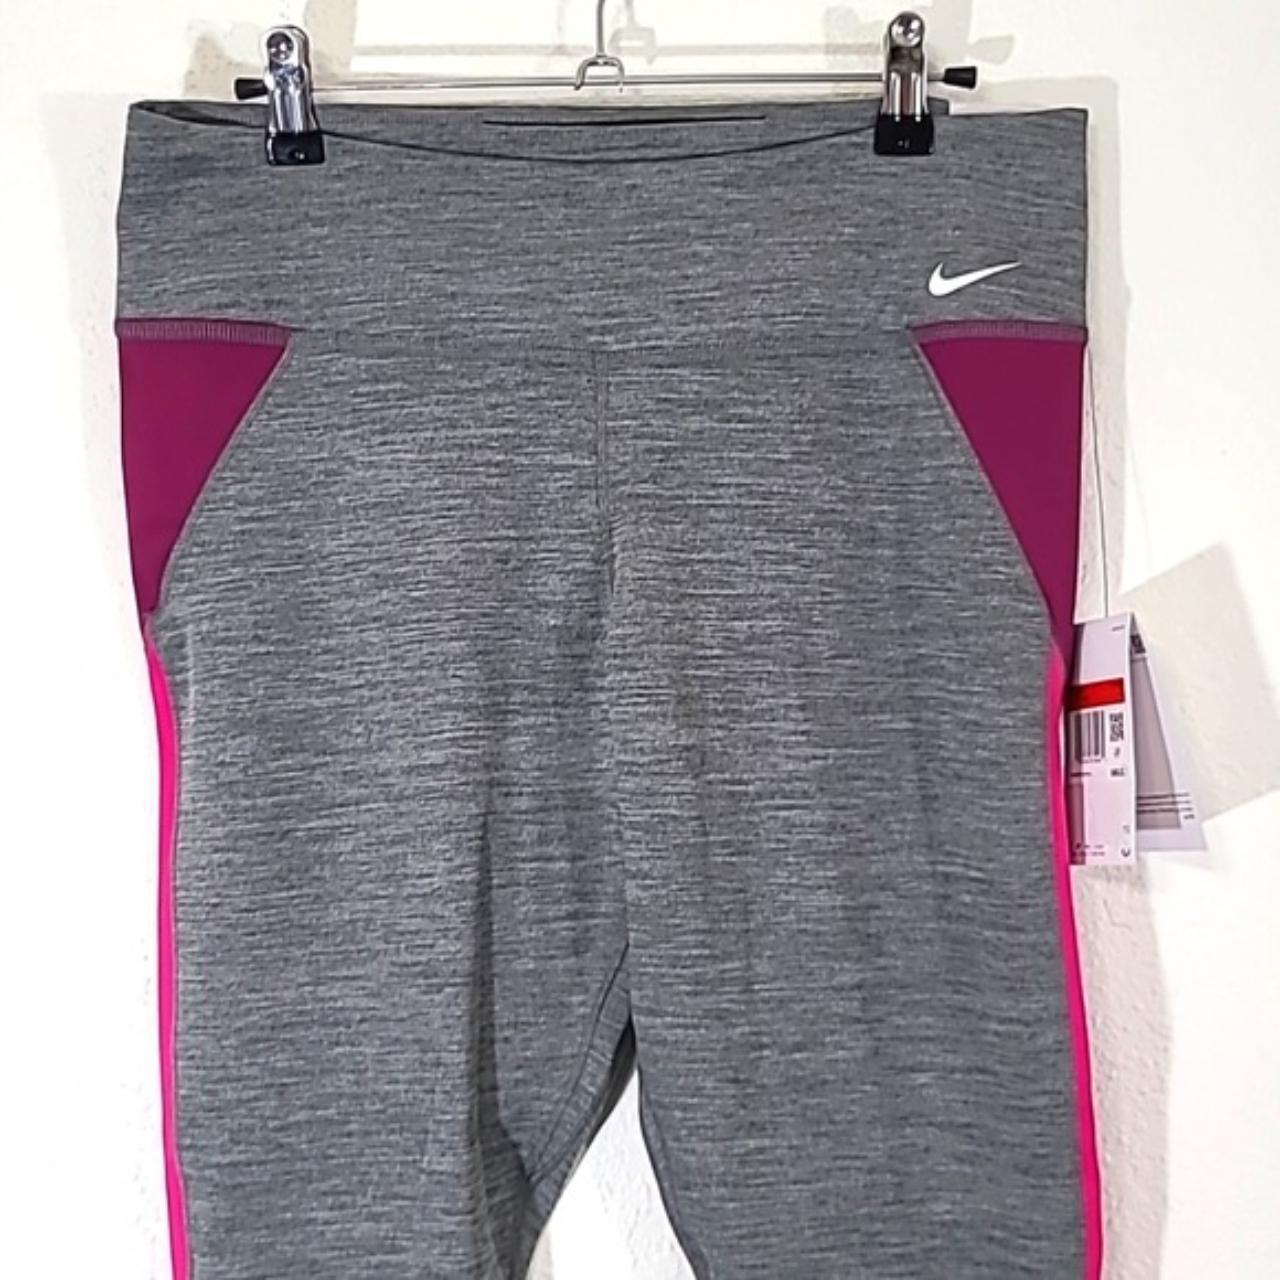 Nike One tight fit mid rise full length pink - Depop